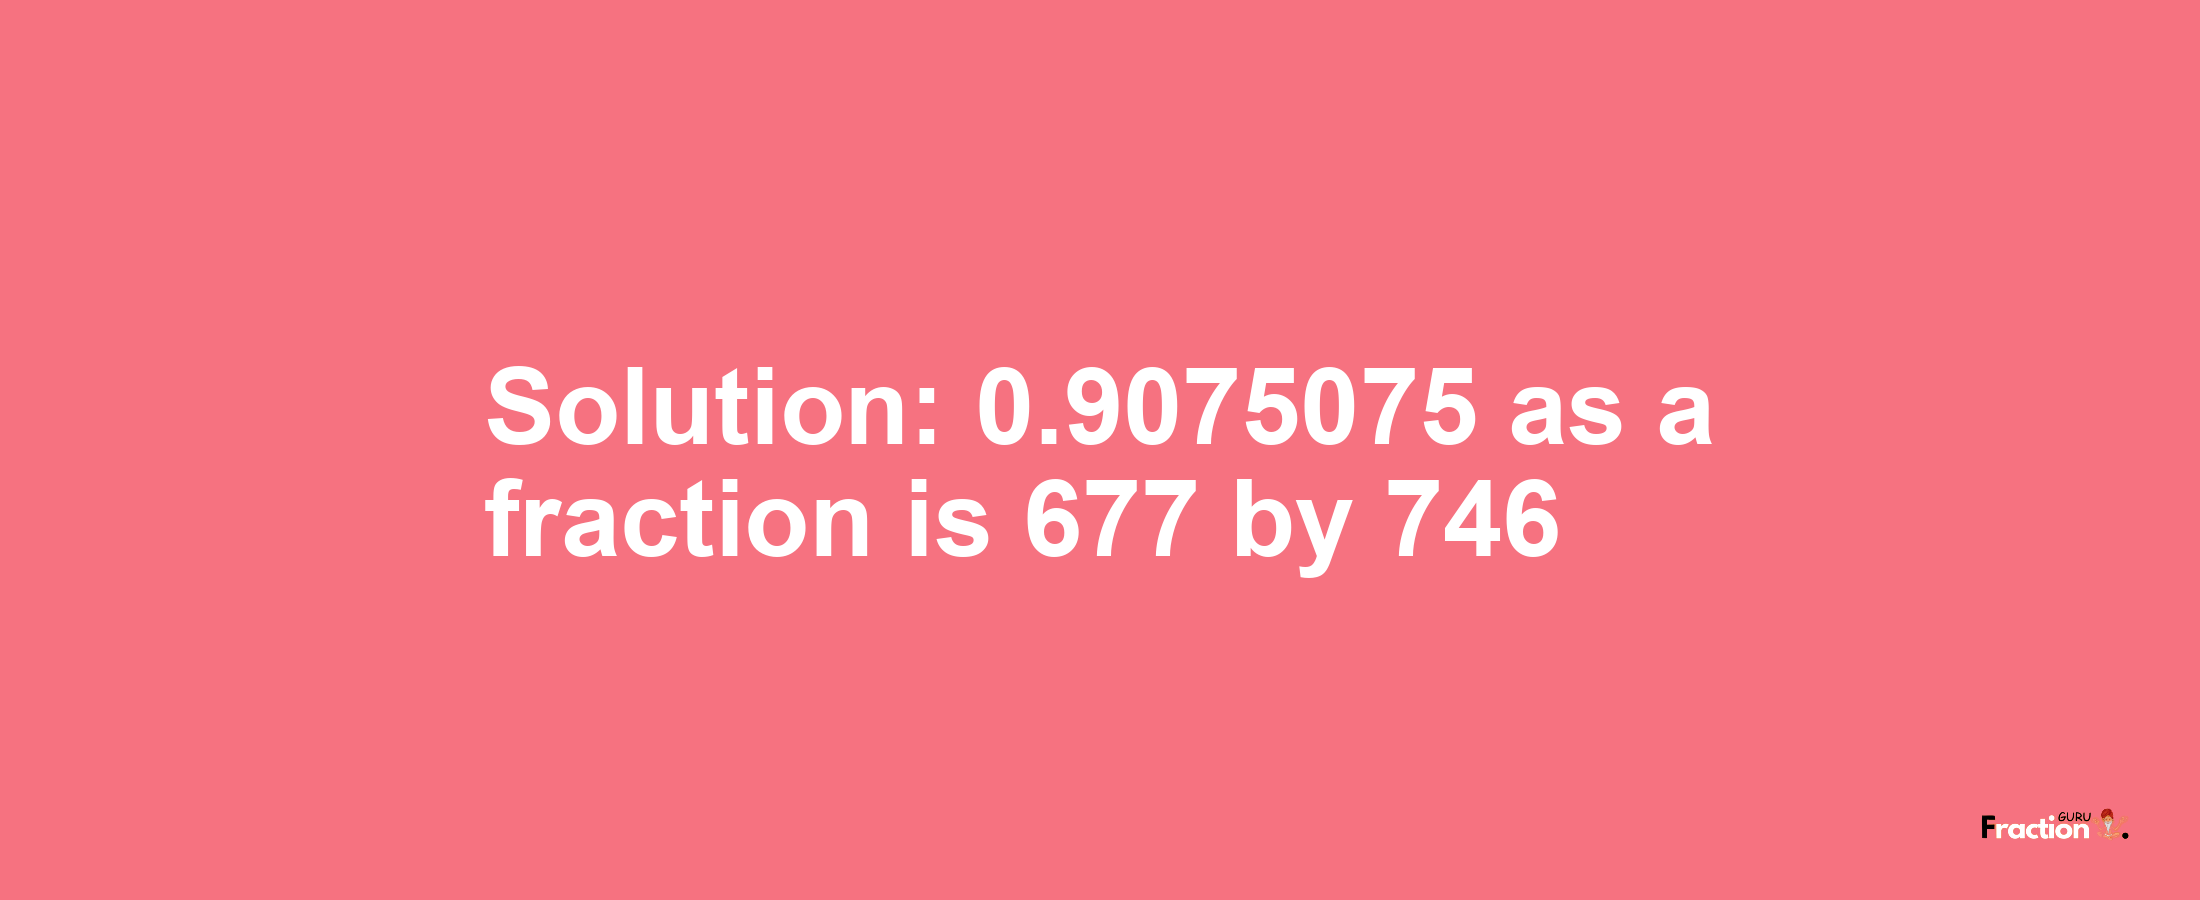 Solution:0.9075075 as a fraction is 677/746